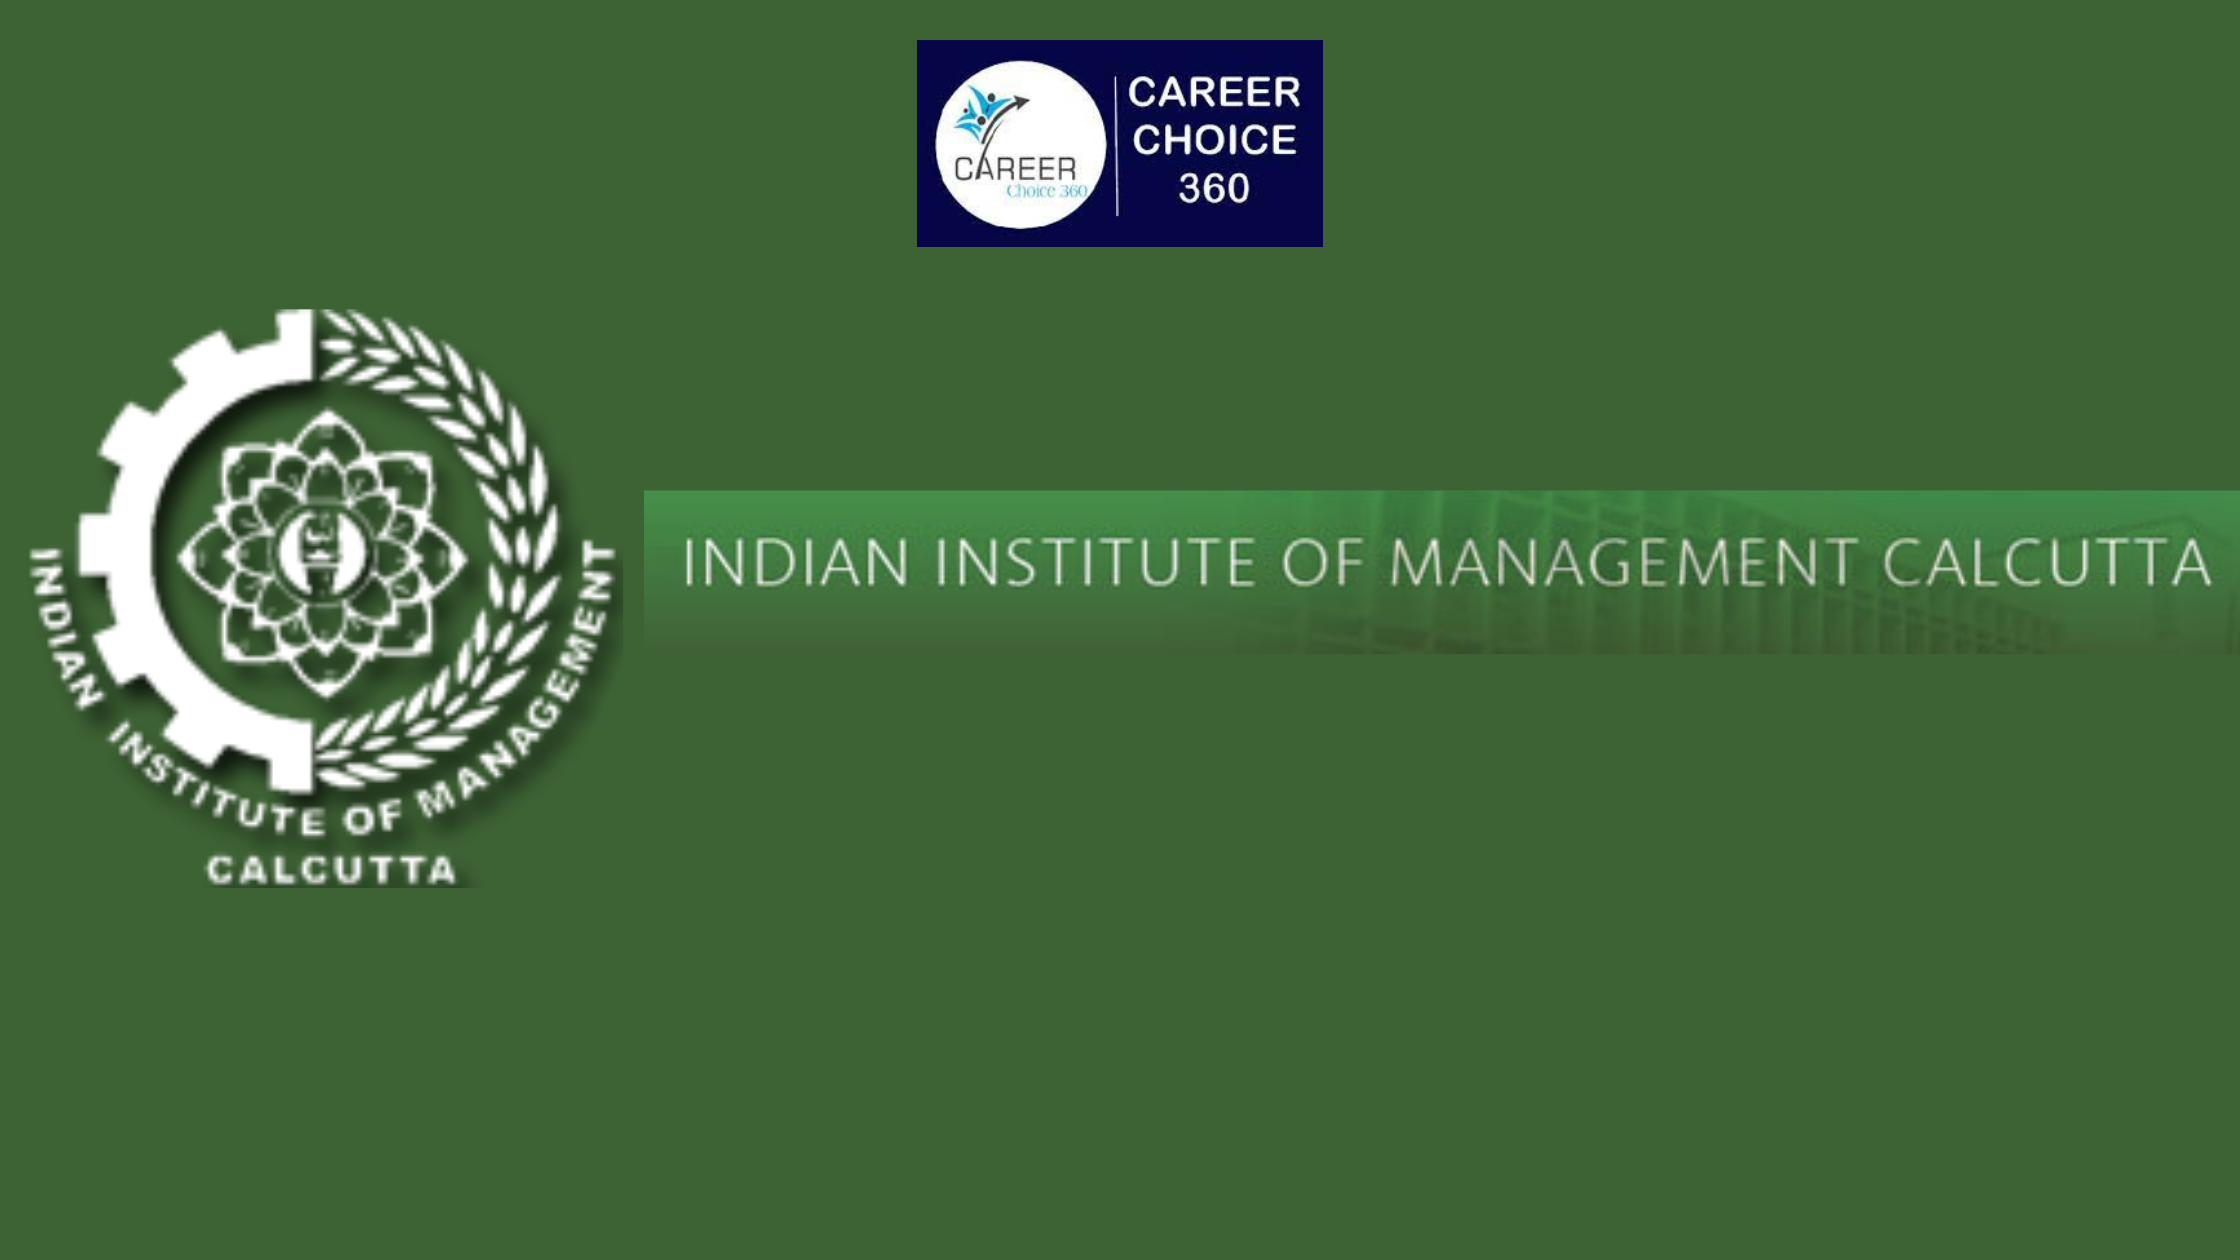 You are currently viewing The Indian Institute of Management Calcutta (IIM Calcutta) : Highlights, Course, Fees, Eligibility Criteria, Ranking, Placement